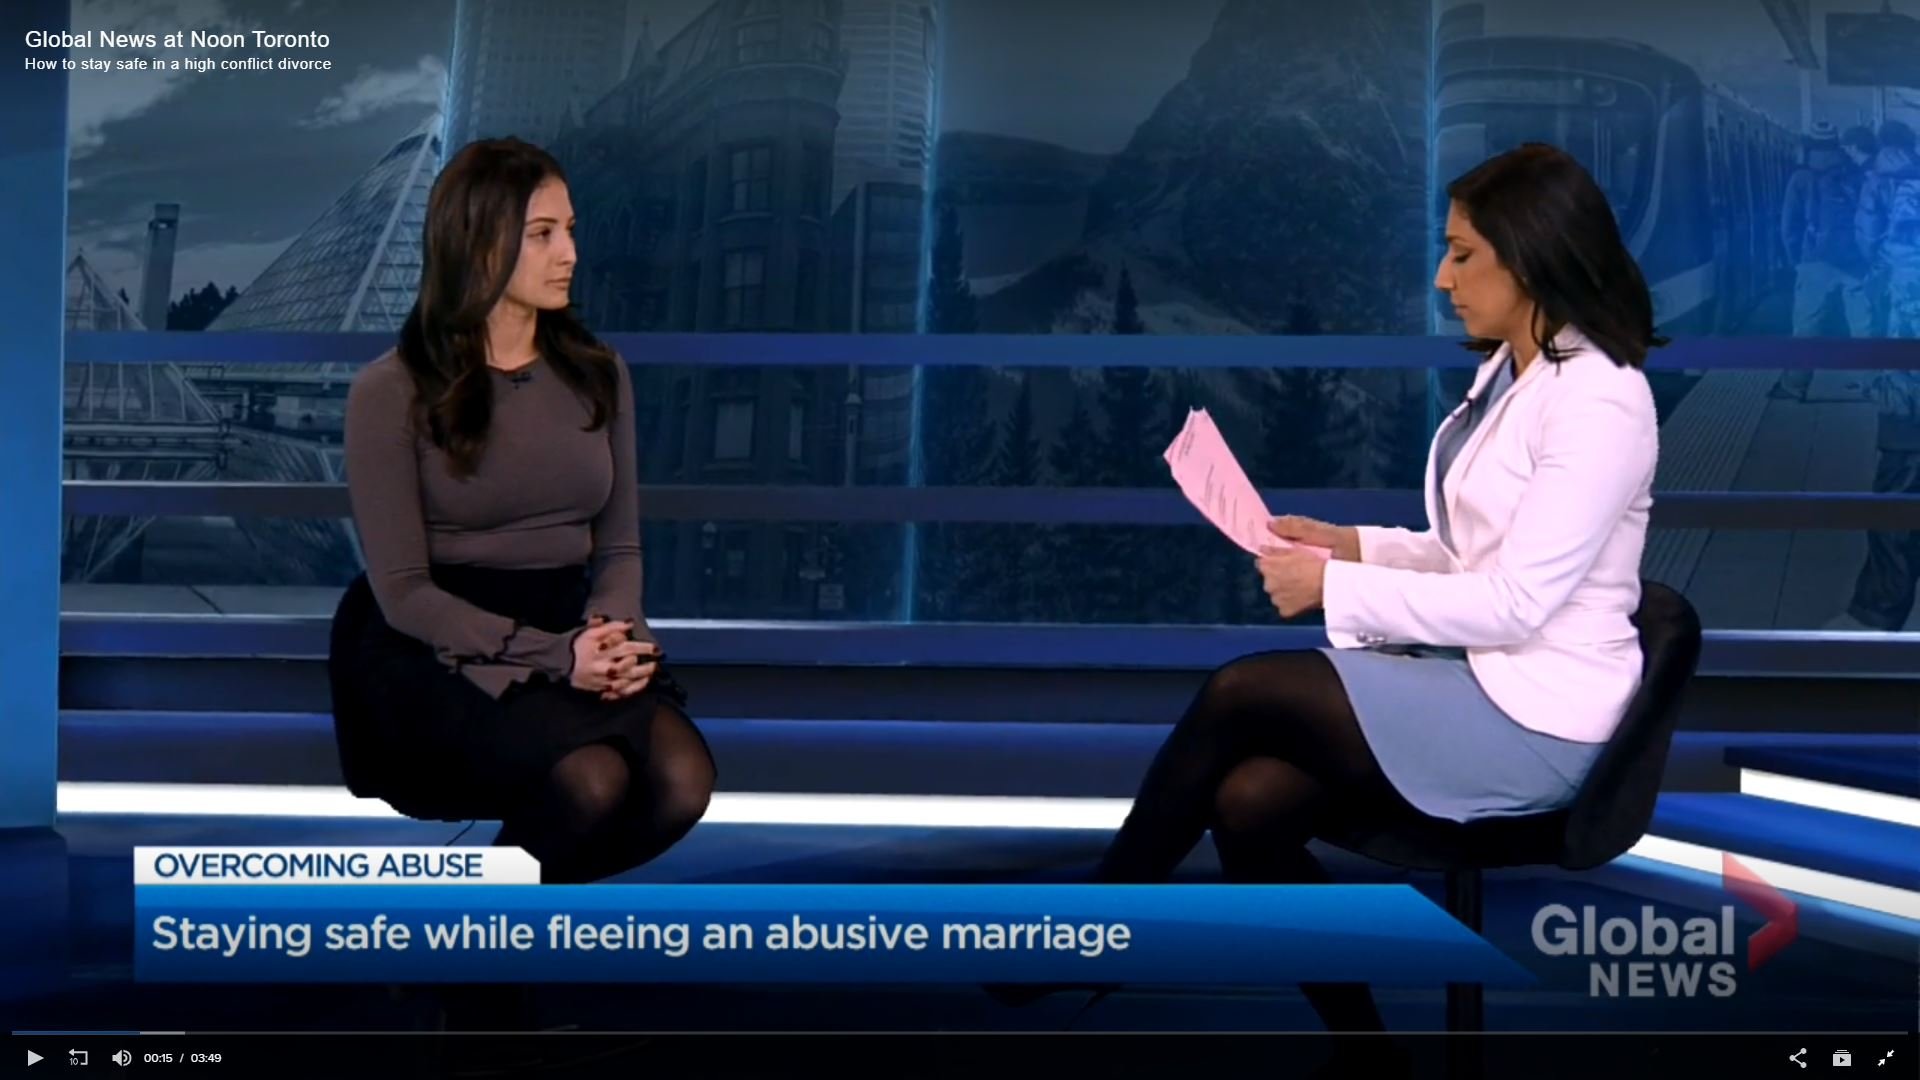 Laura-Paris-Global-News-How-to-stay-safe-in-a-high-conflict-divorce